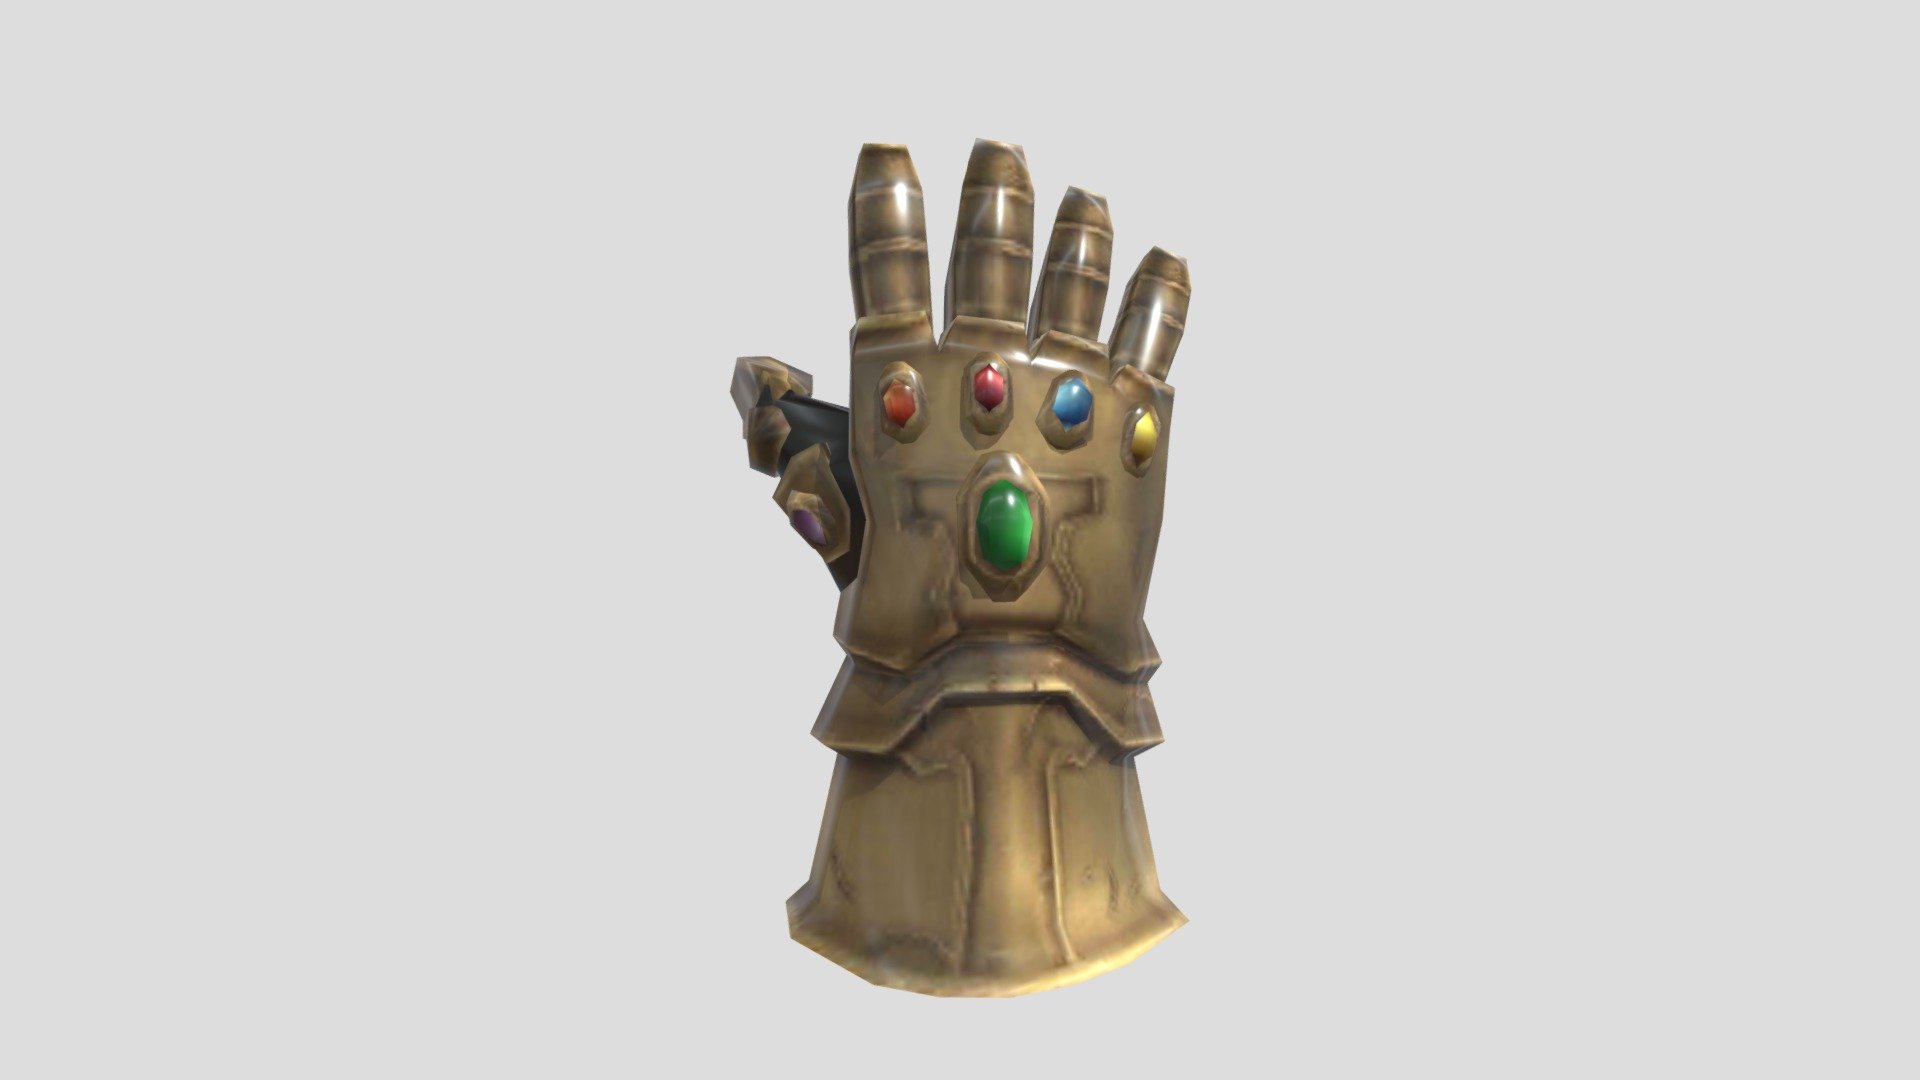 YouTube Link: https://youtube.com/@BELORSE

This is Thanos Infinity Stones Gauntlet, It is well textured but There is No rig You can Download It And can Use On your Animations 3d model